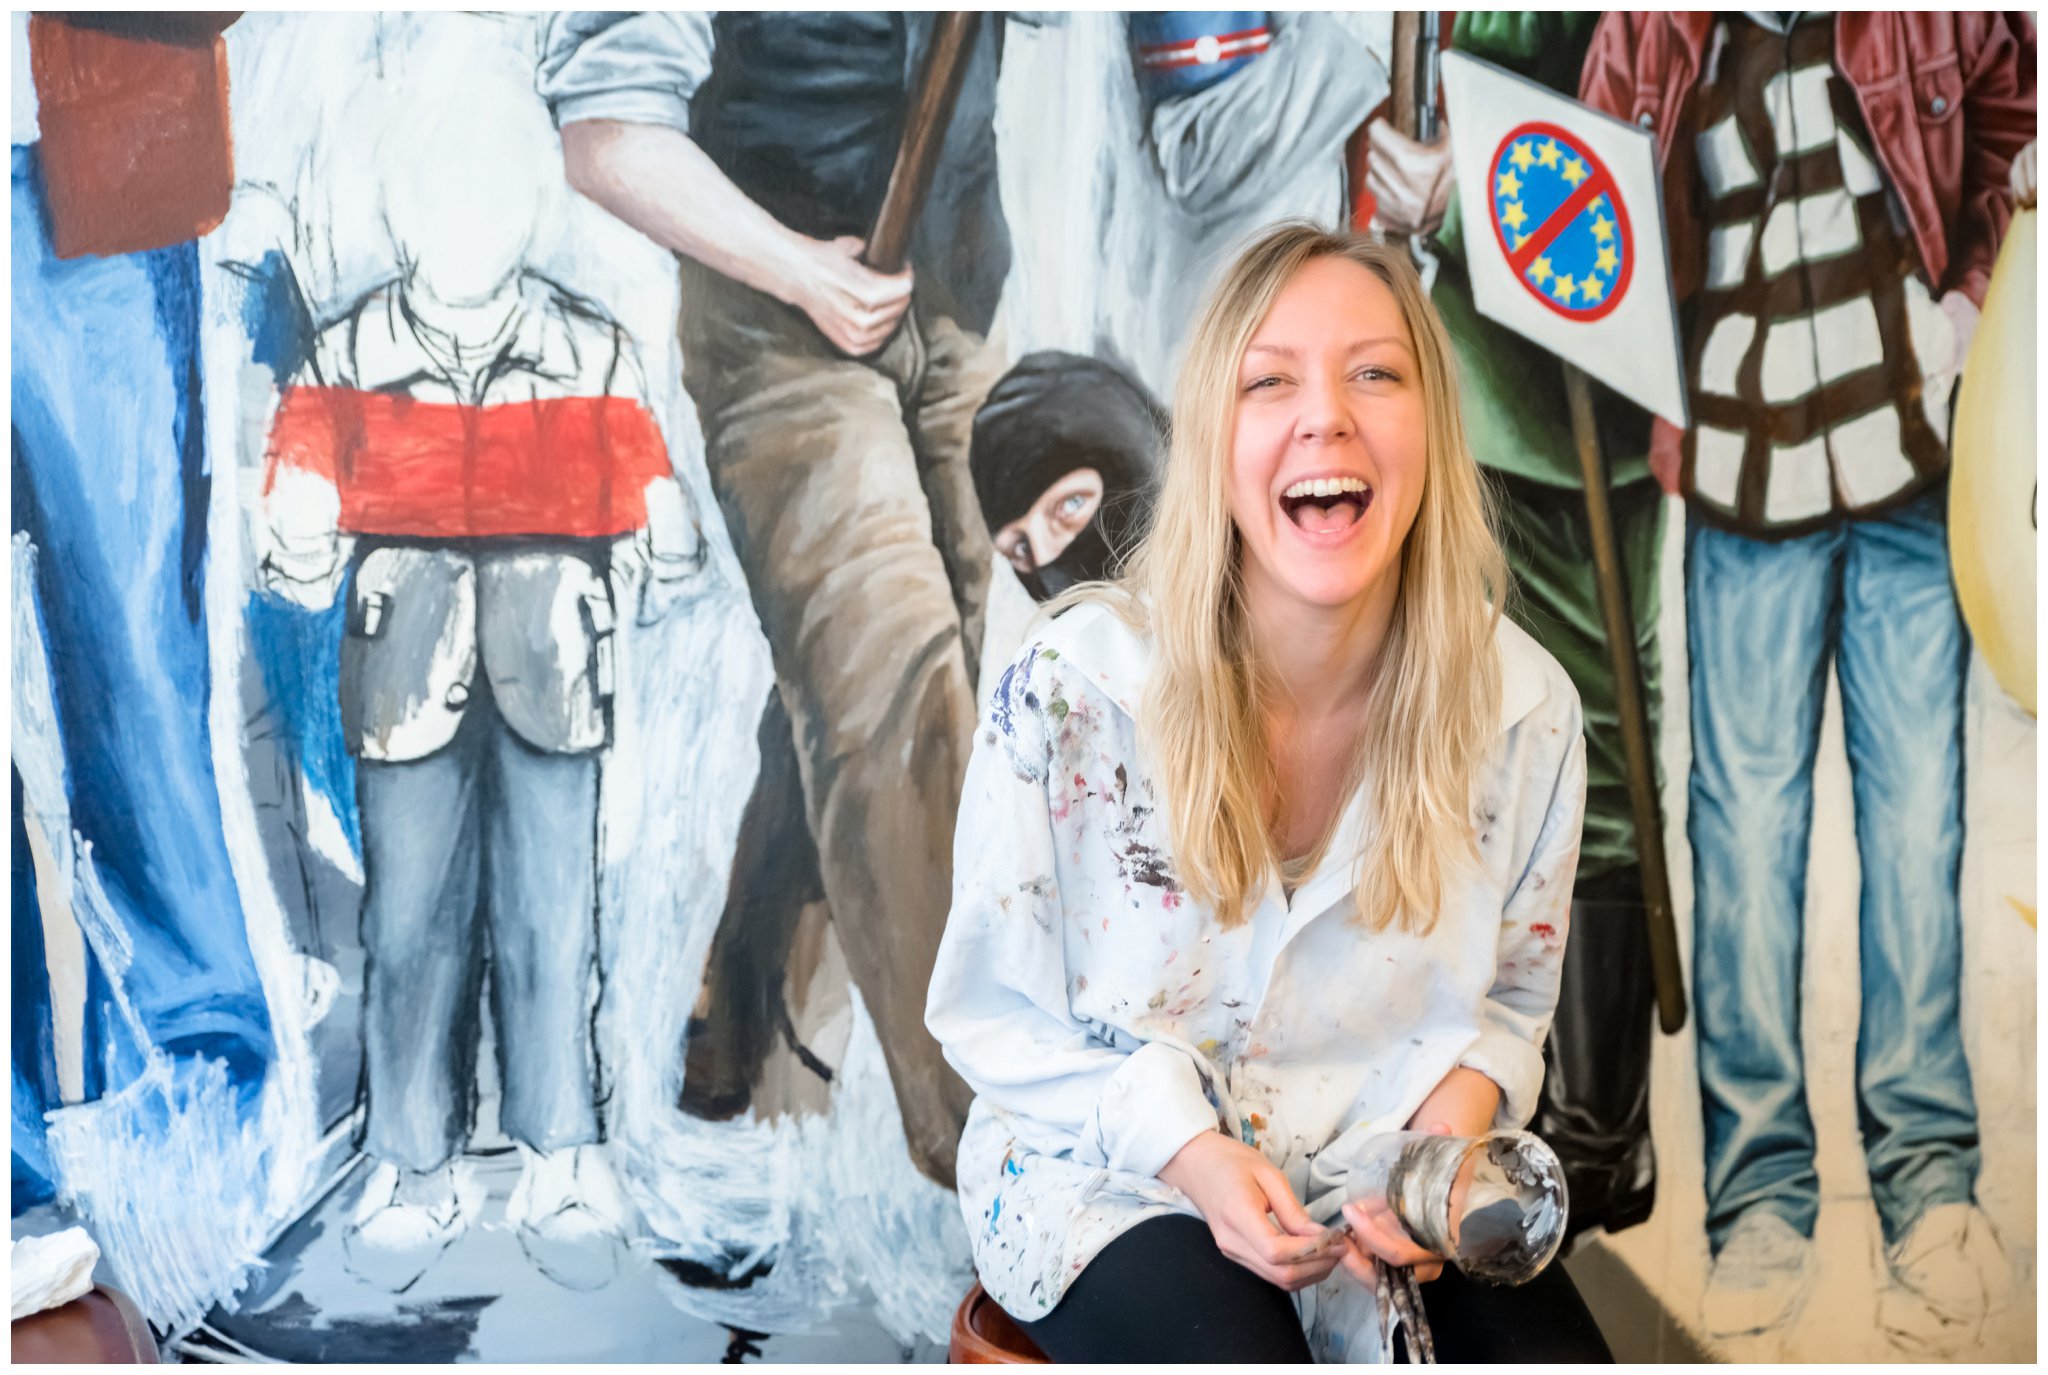 Rikke is an artist, painter, and all-around joyful, free spirit and this is a storytelling shoot of her passion with a dose of history of Copenhagen.